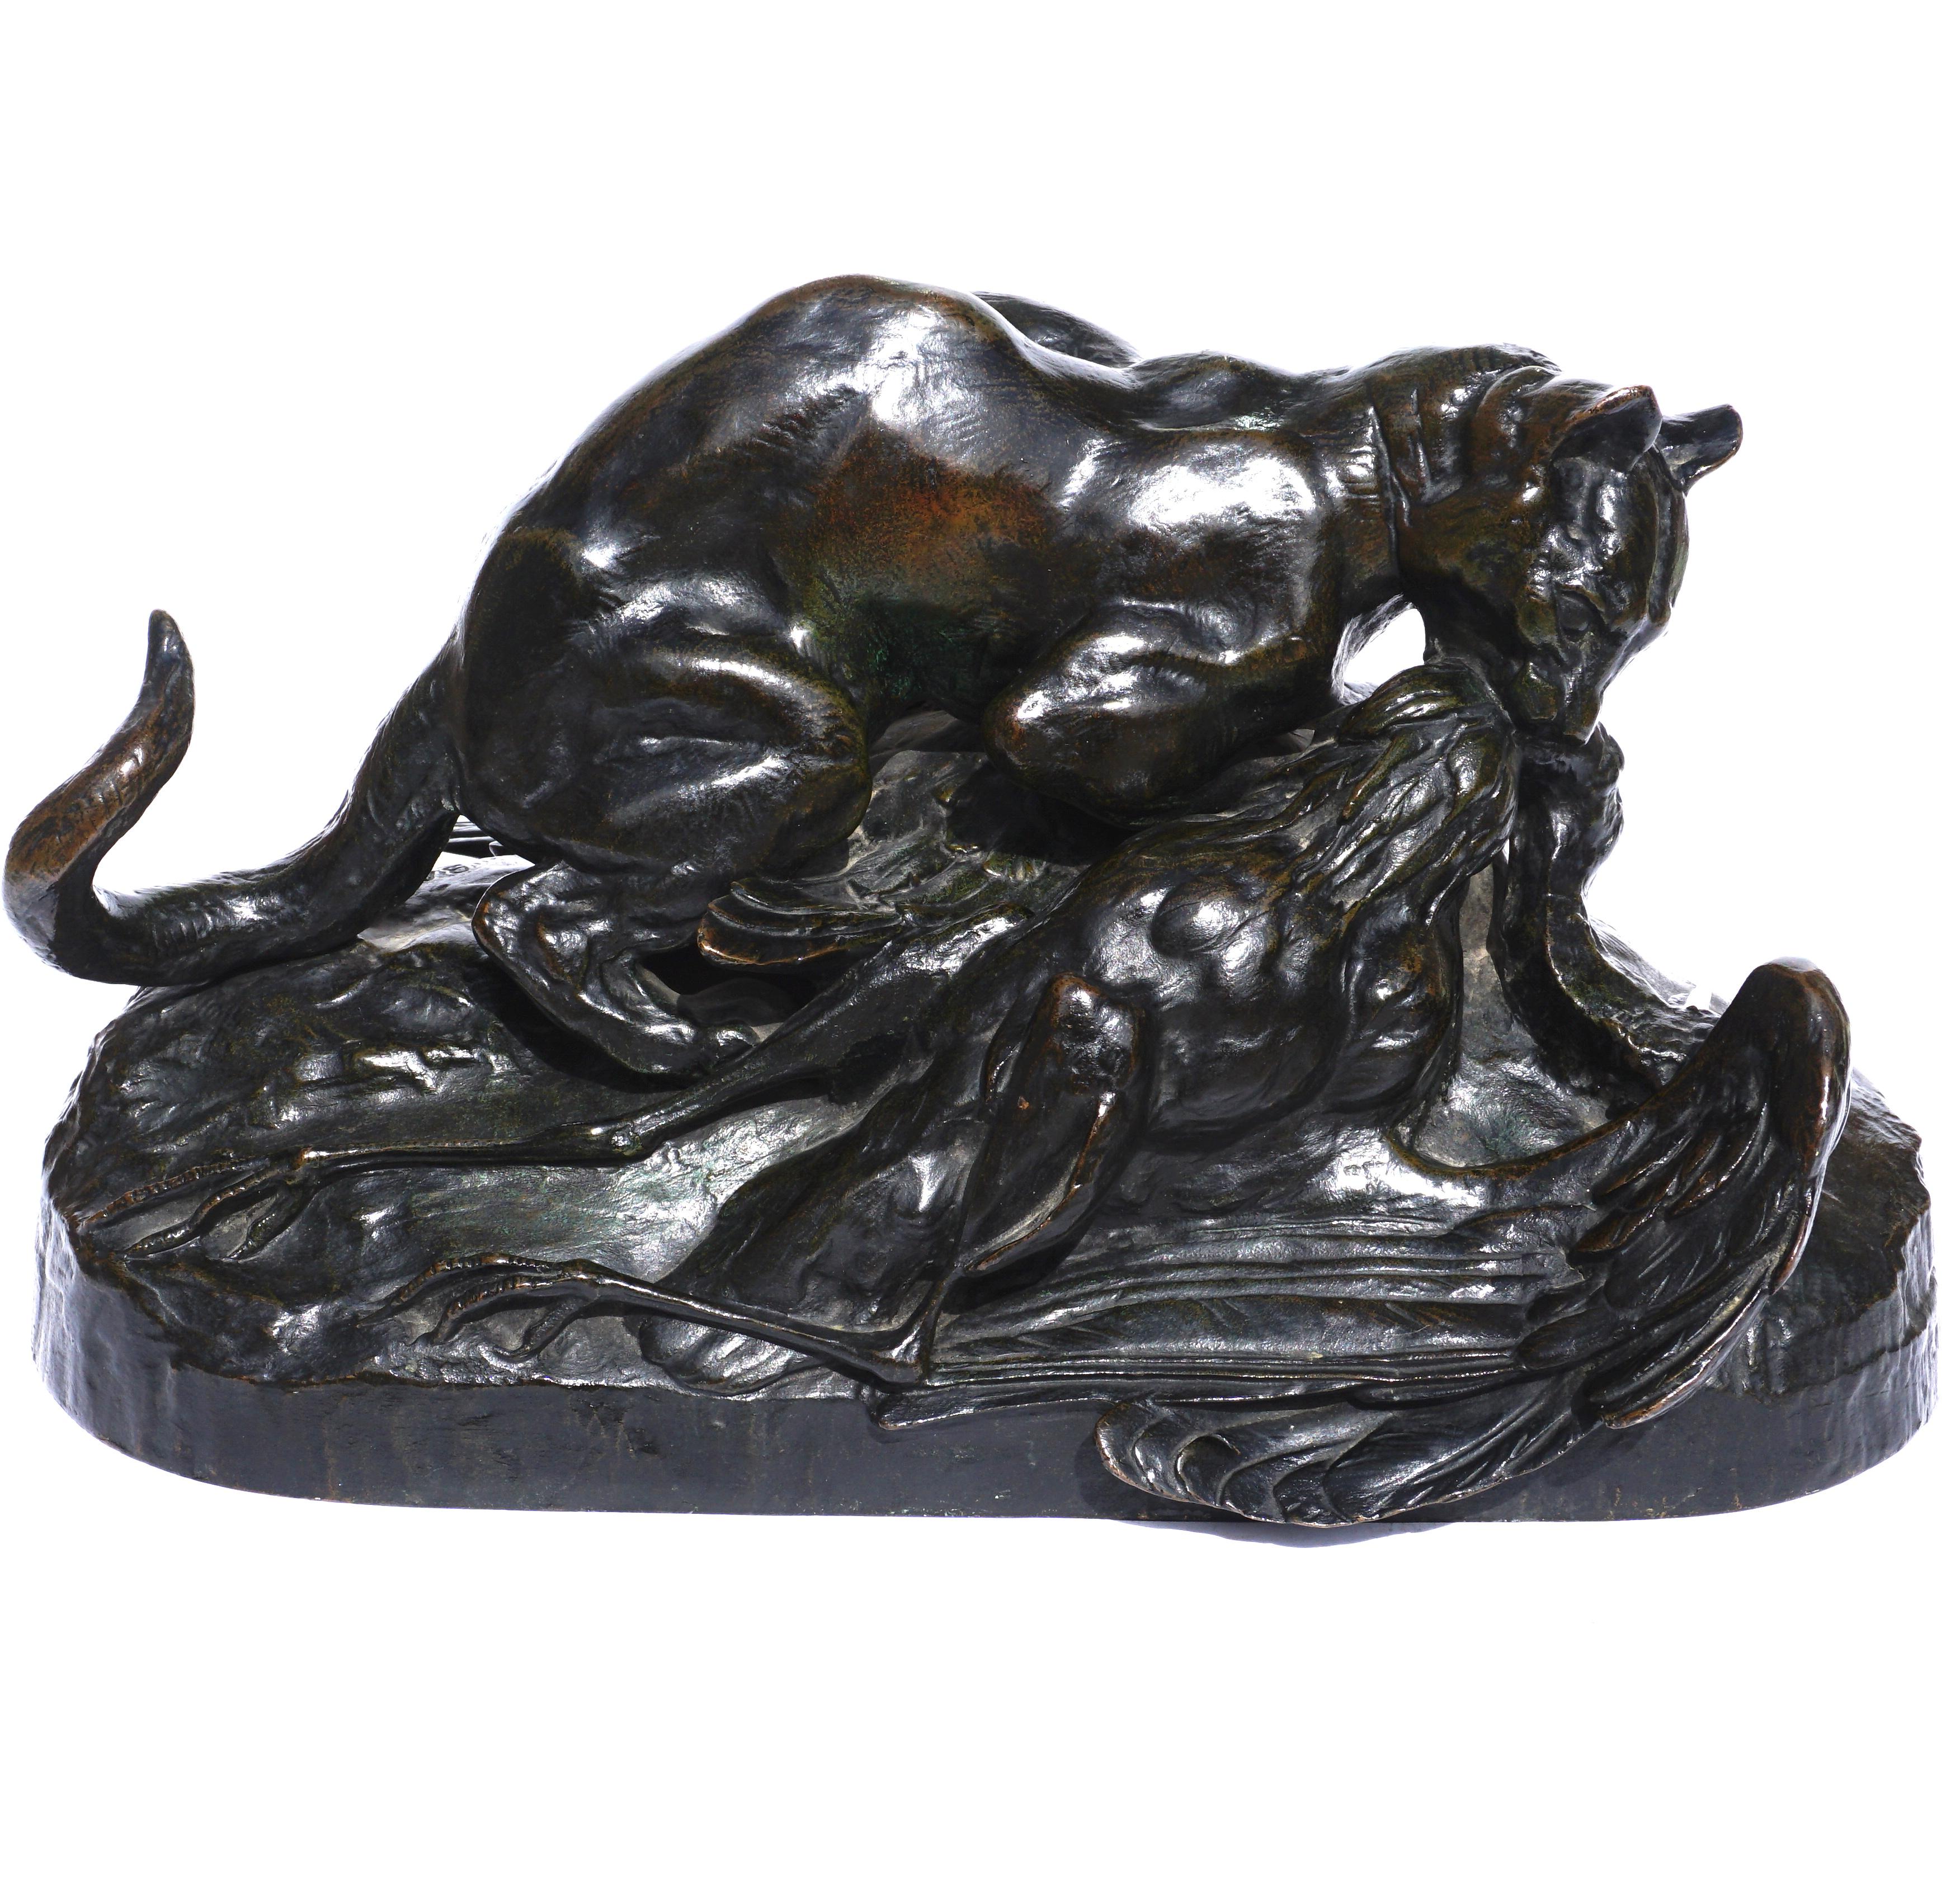 Antoine-Louis Barye (French, 1795-1875)
Ocelot emportant un héron (Ocelot carrying off a heron)
bronze sculpture, dark-brown patina, Signed “Barye” and “F. Barbidienne Fondeur Paris”, 7 in. (18 cm.) high 

This Barye bronze takes my breath away each